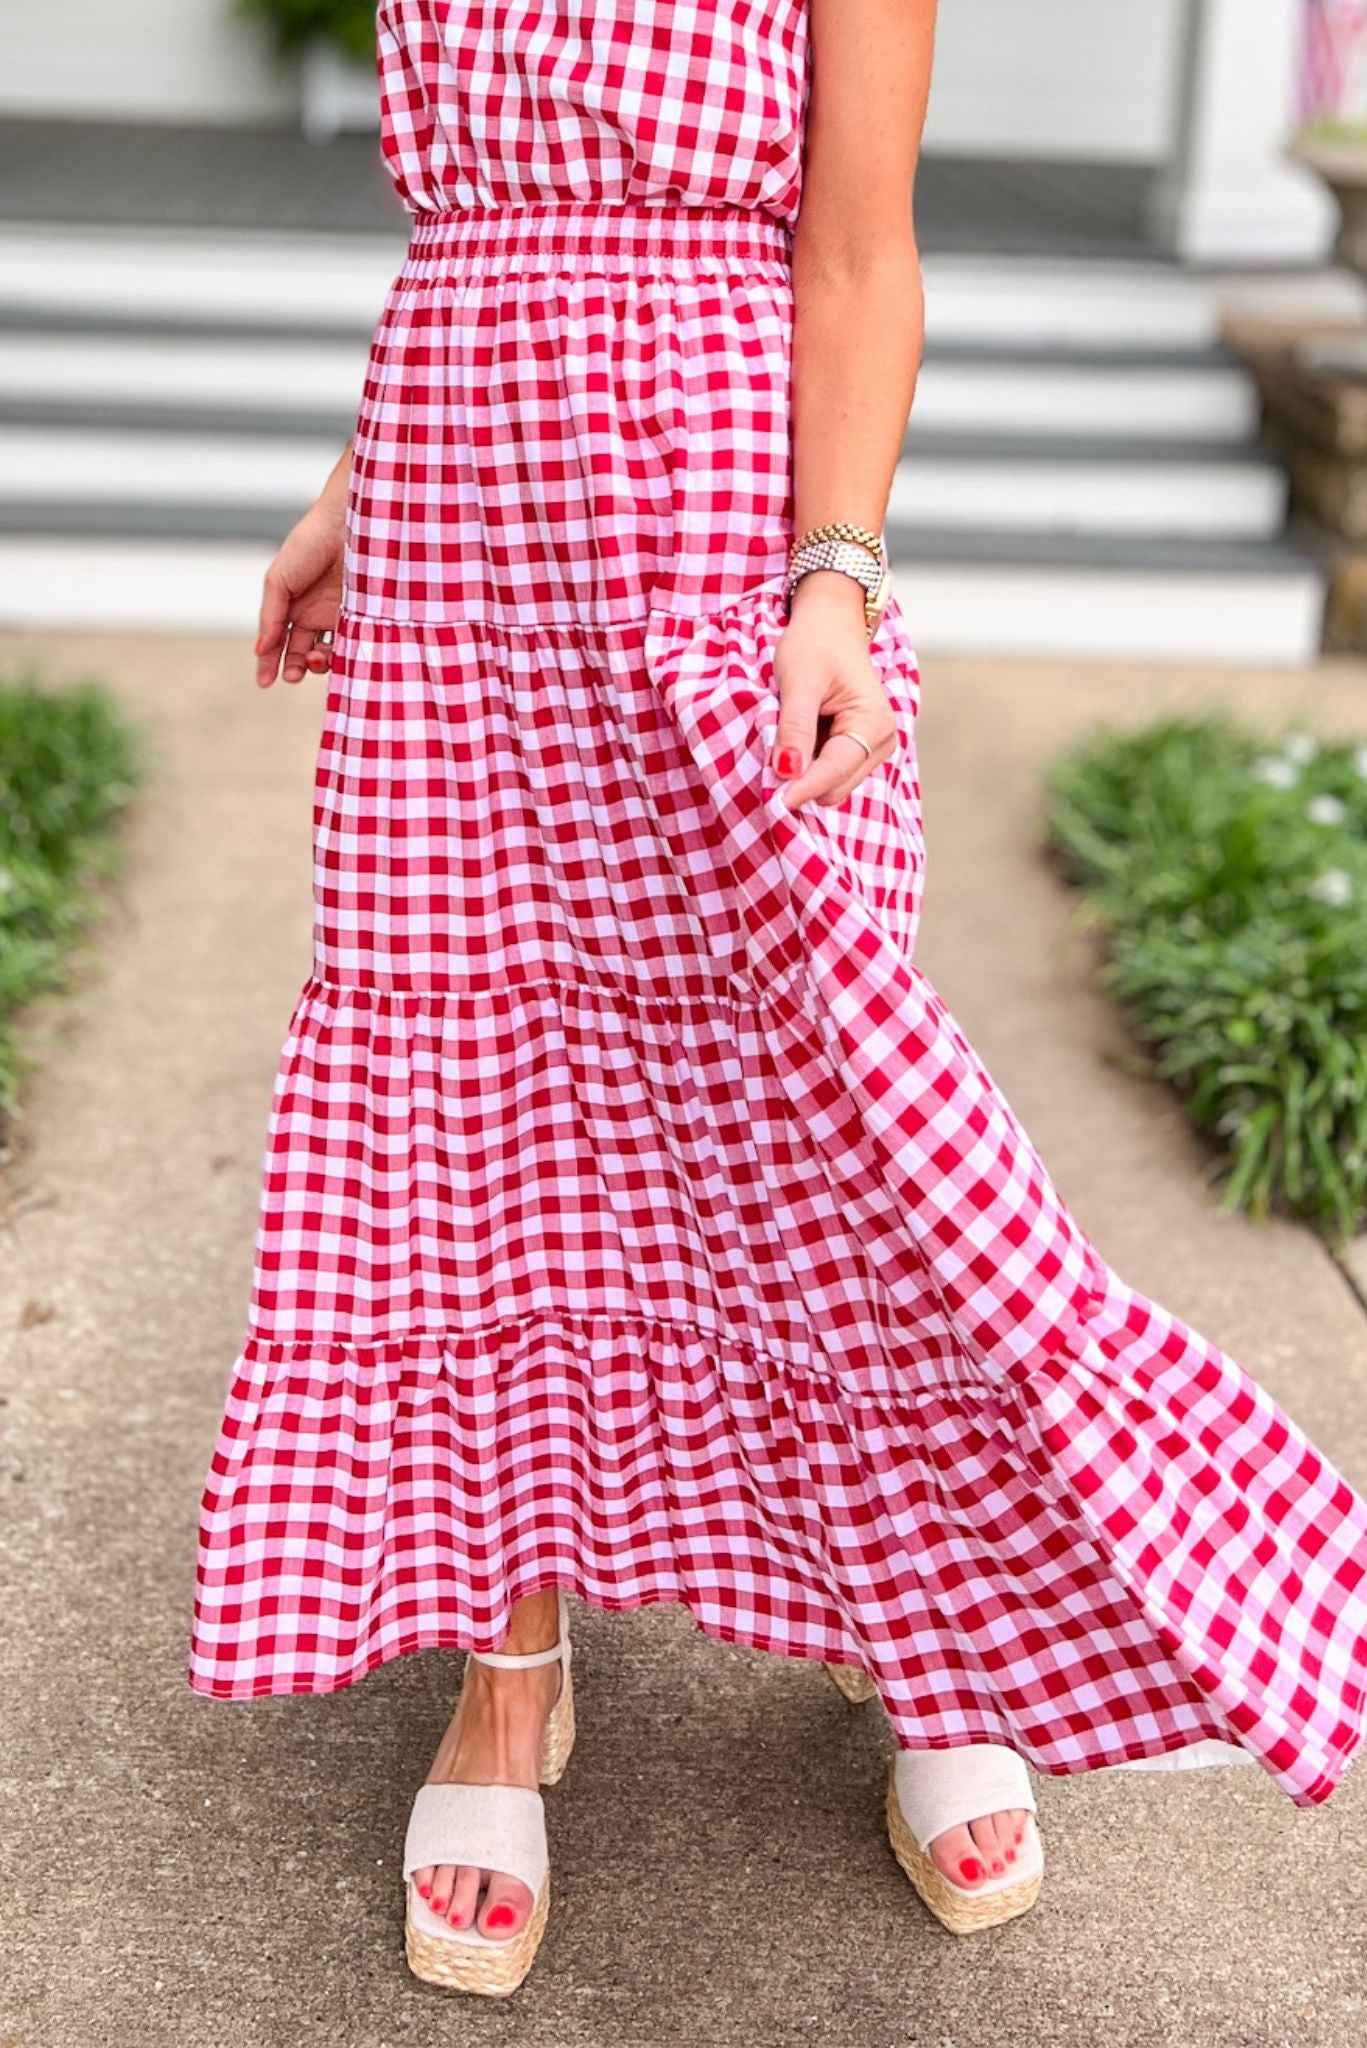 SSYS The Sadie Maxi Skirt In Red Gingham, ssys skirt, ssys the label, elevated skirt, must have skirt, Fourth of July collection, must have style, mom style, summer style, shop style your senses by MALLORY FITZSIMMONS, ssys by MALLORY FITZSIMMONS